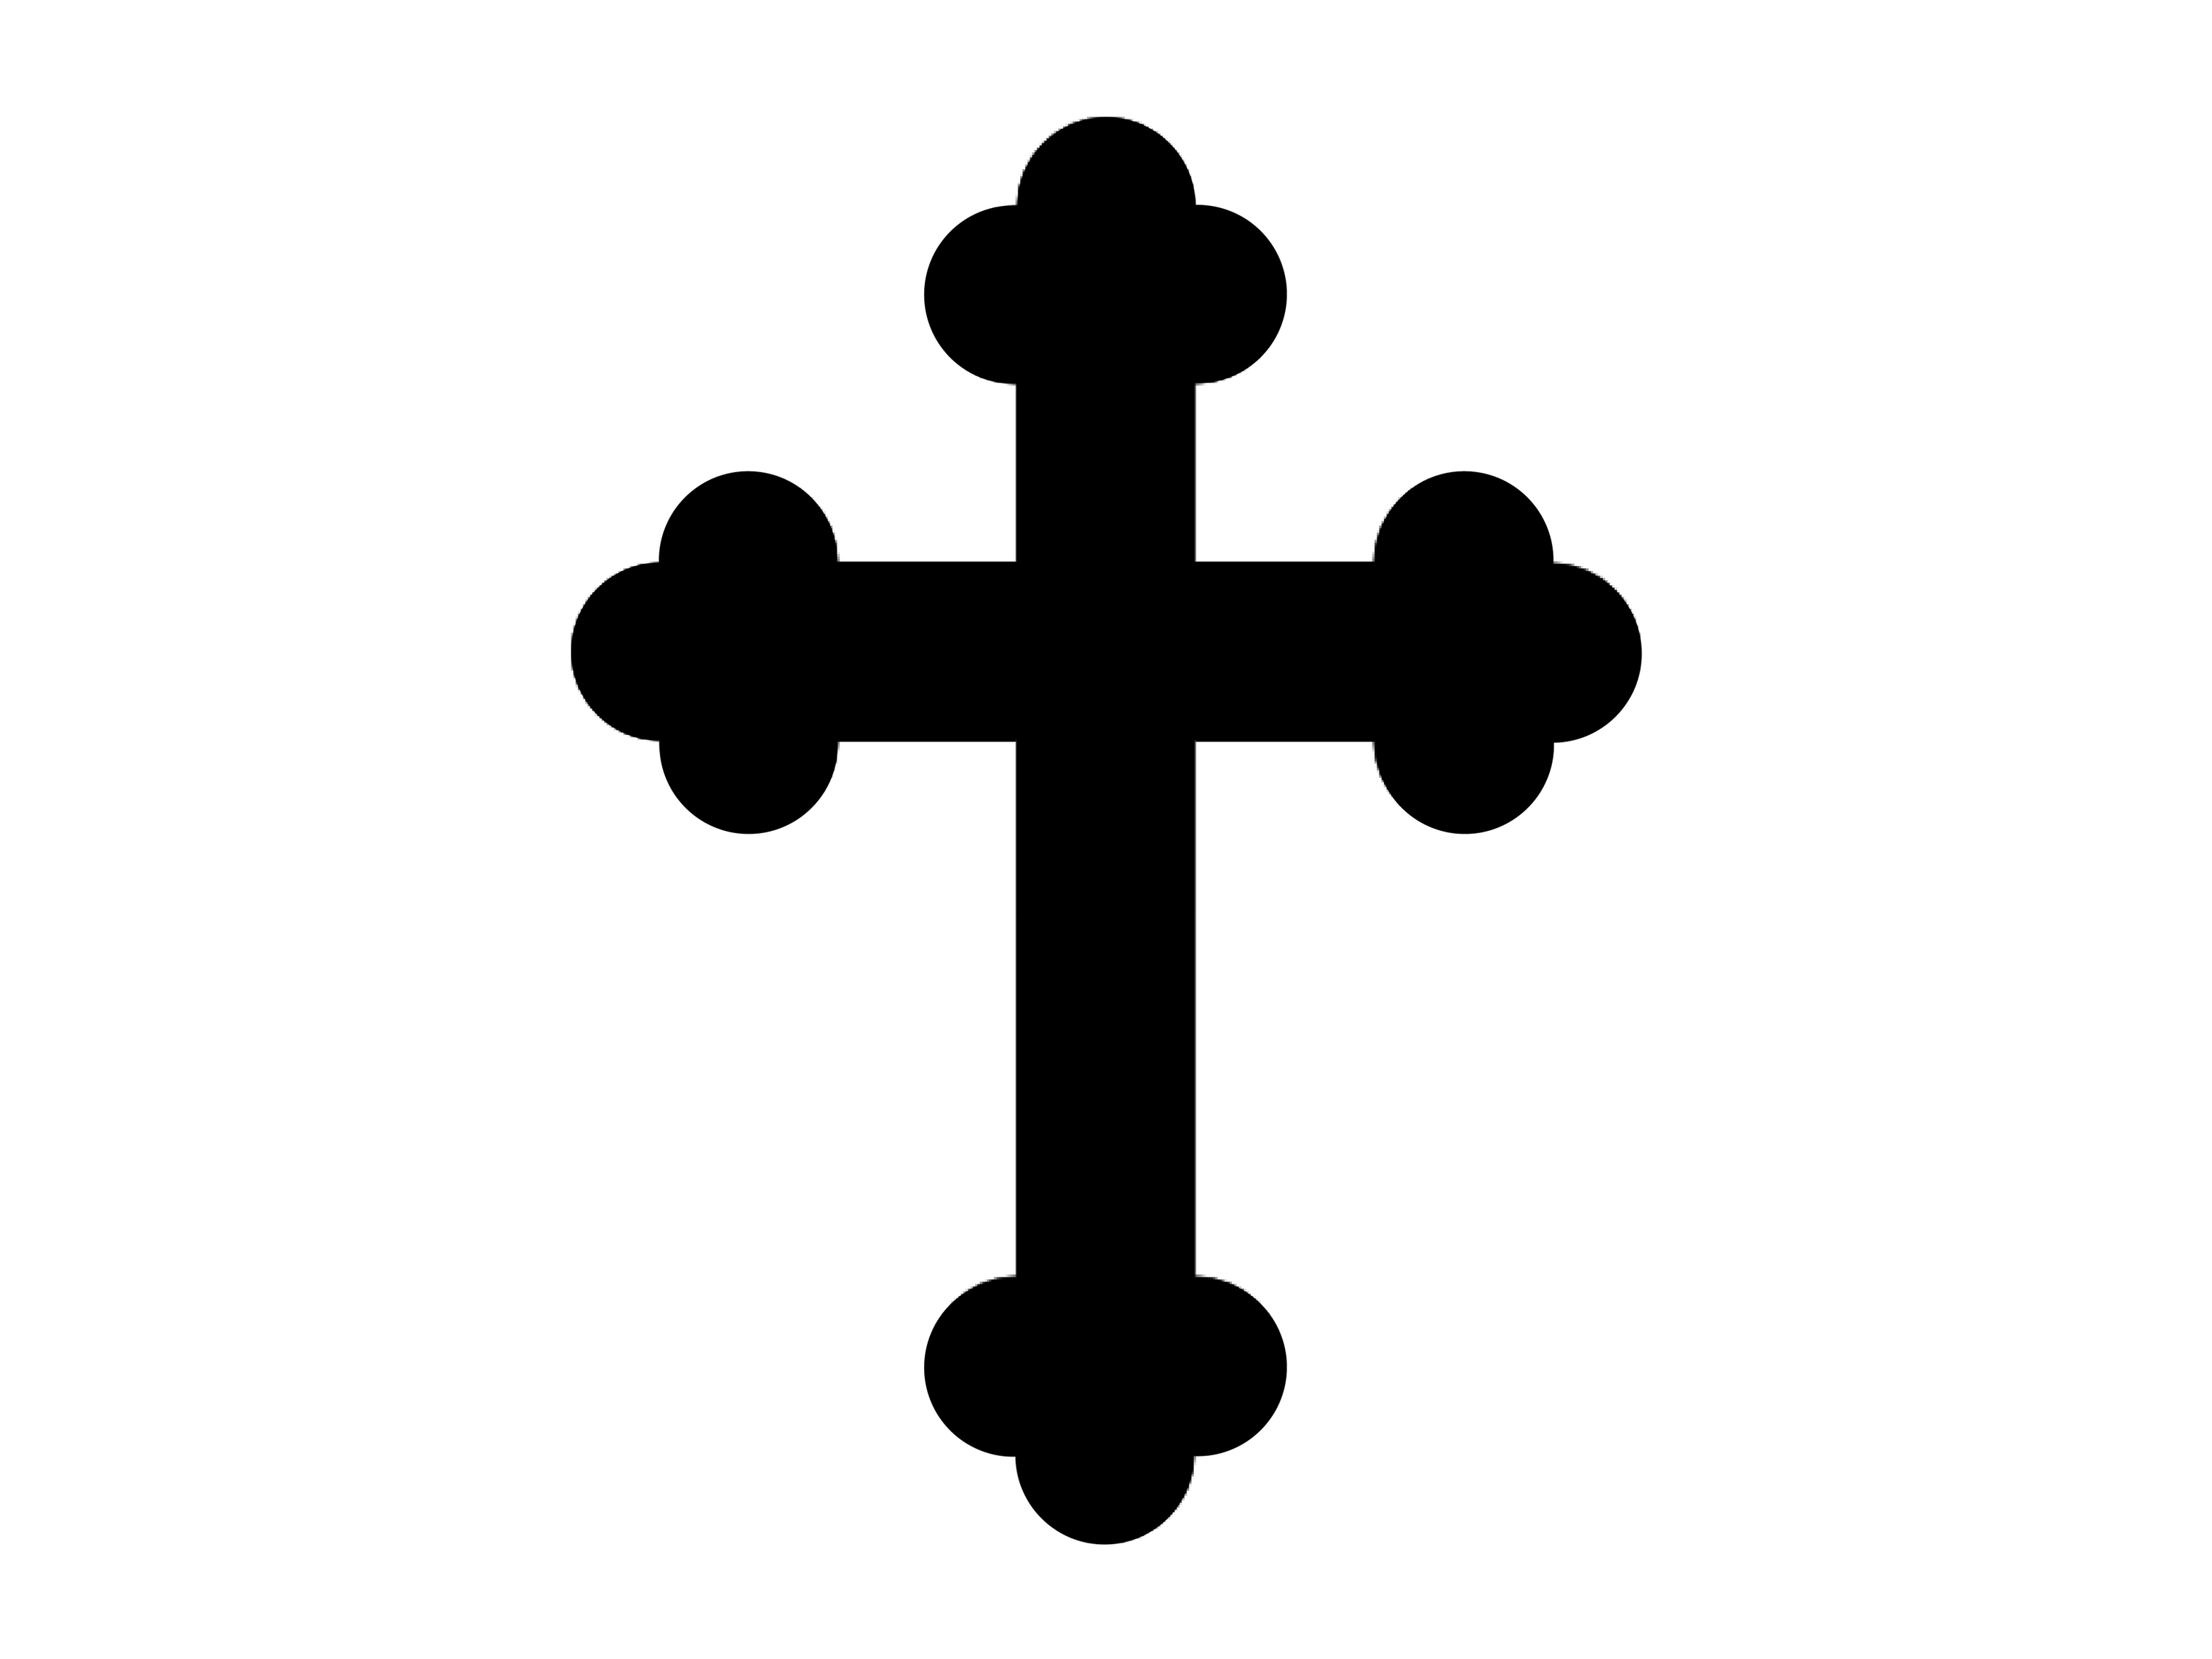 Fancy Cross Designs Drawings Clipart - Free to use Clip Art Resource